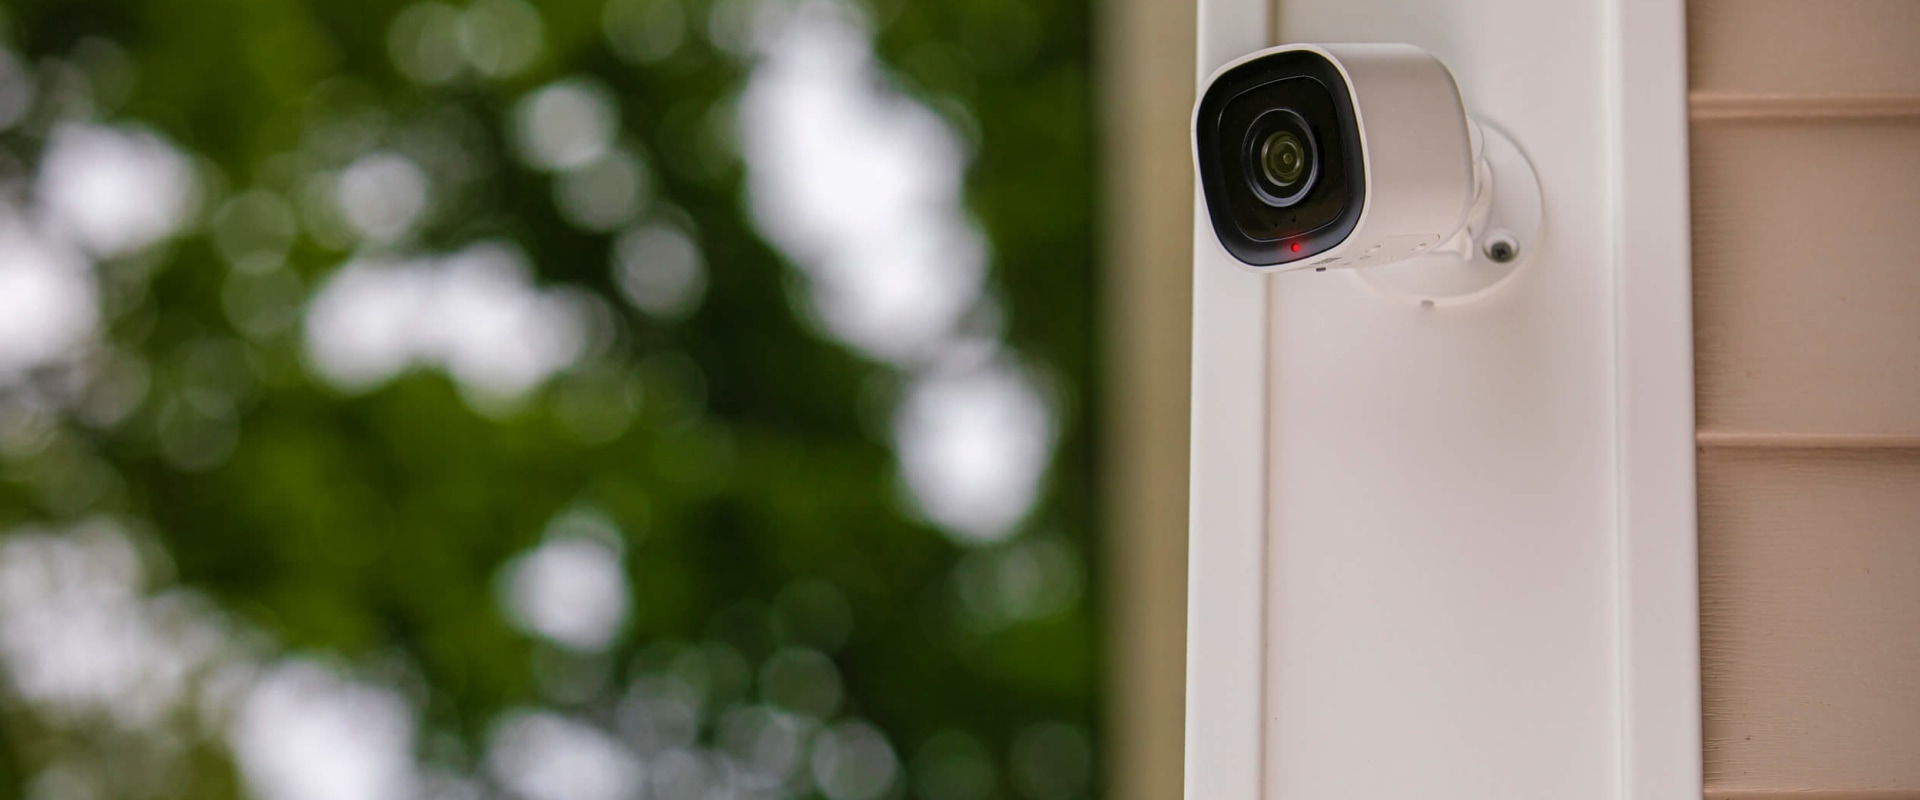 Understanding Push Notifications: A Comprehensive Guide to Security Camera Alerts